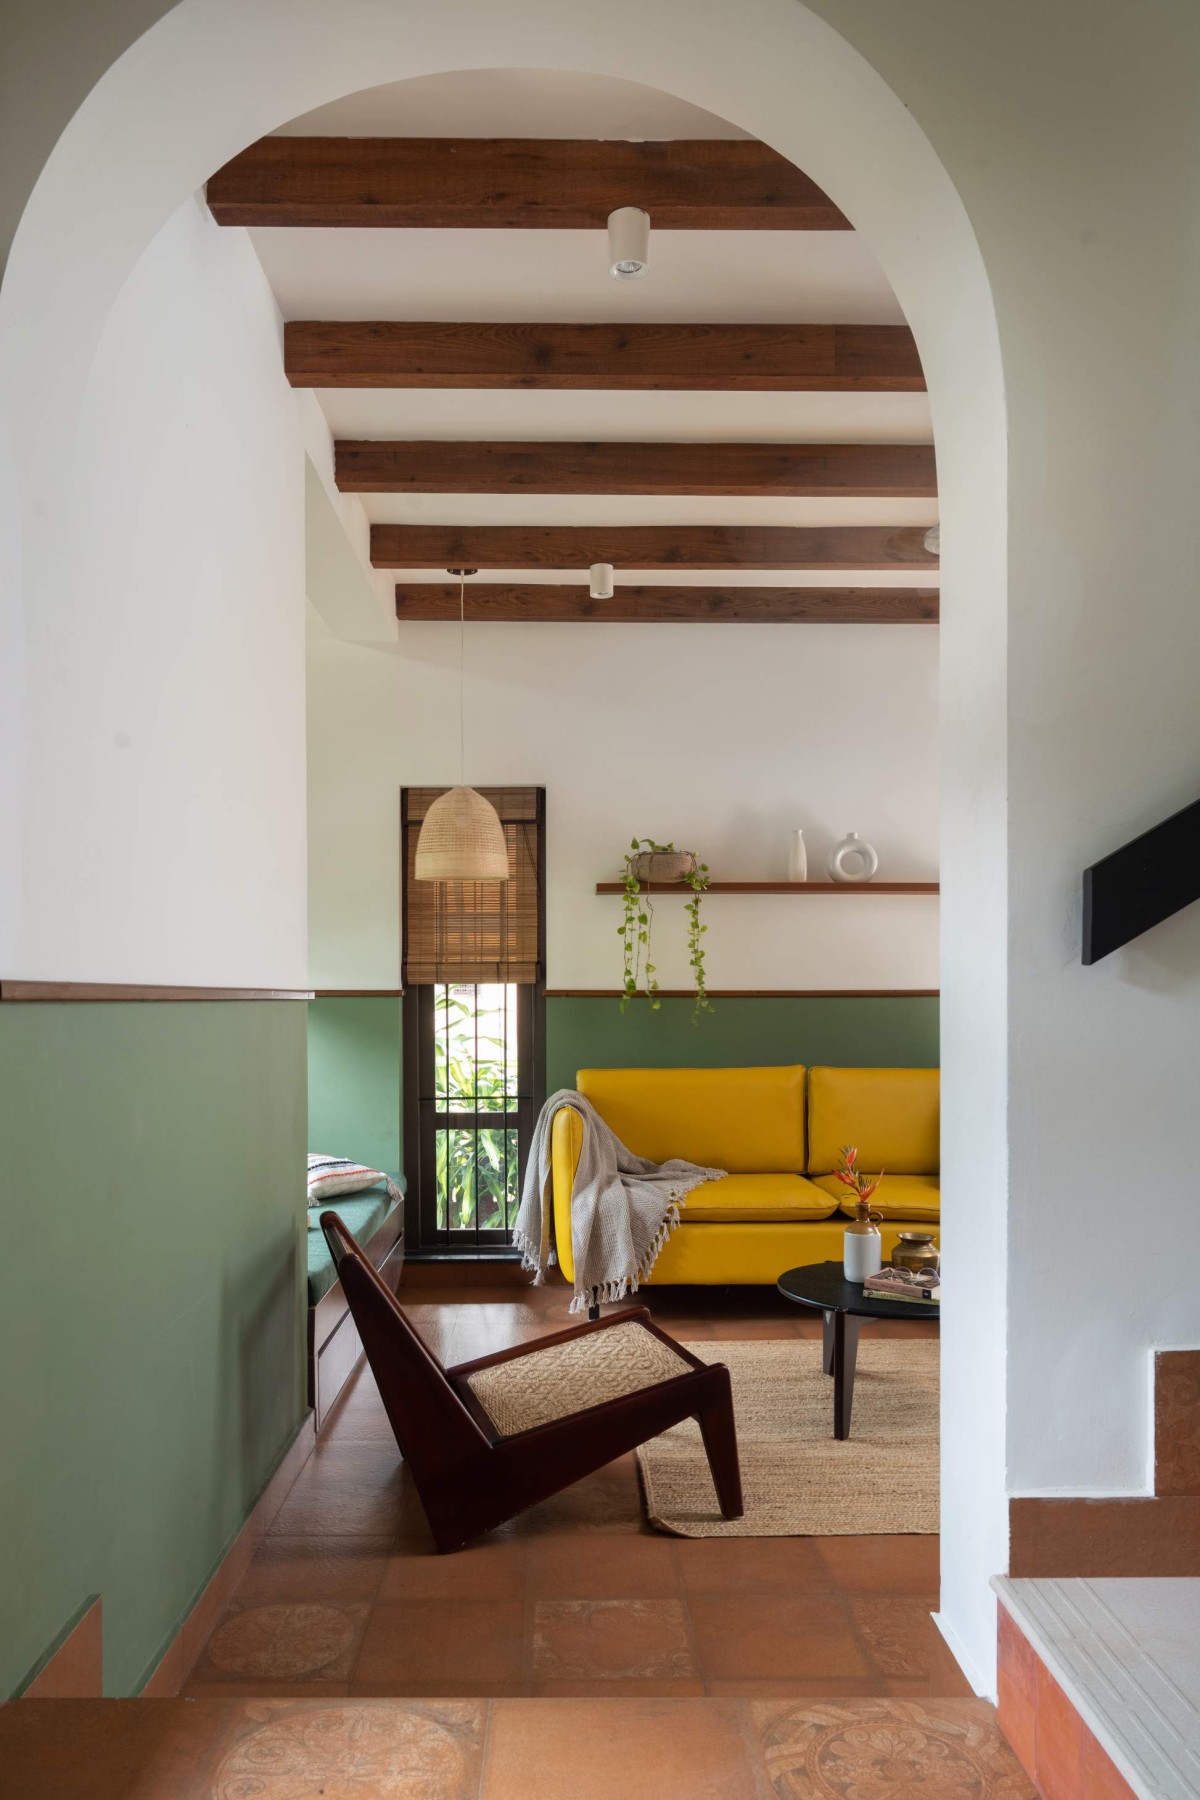 Interior view of MOZHI- The House Of Conversations by ARK Architecture Studio